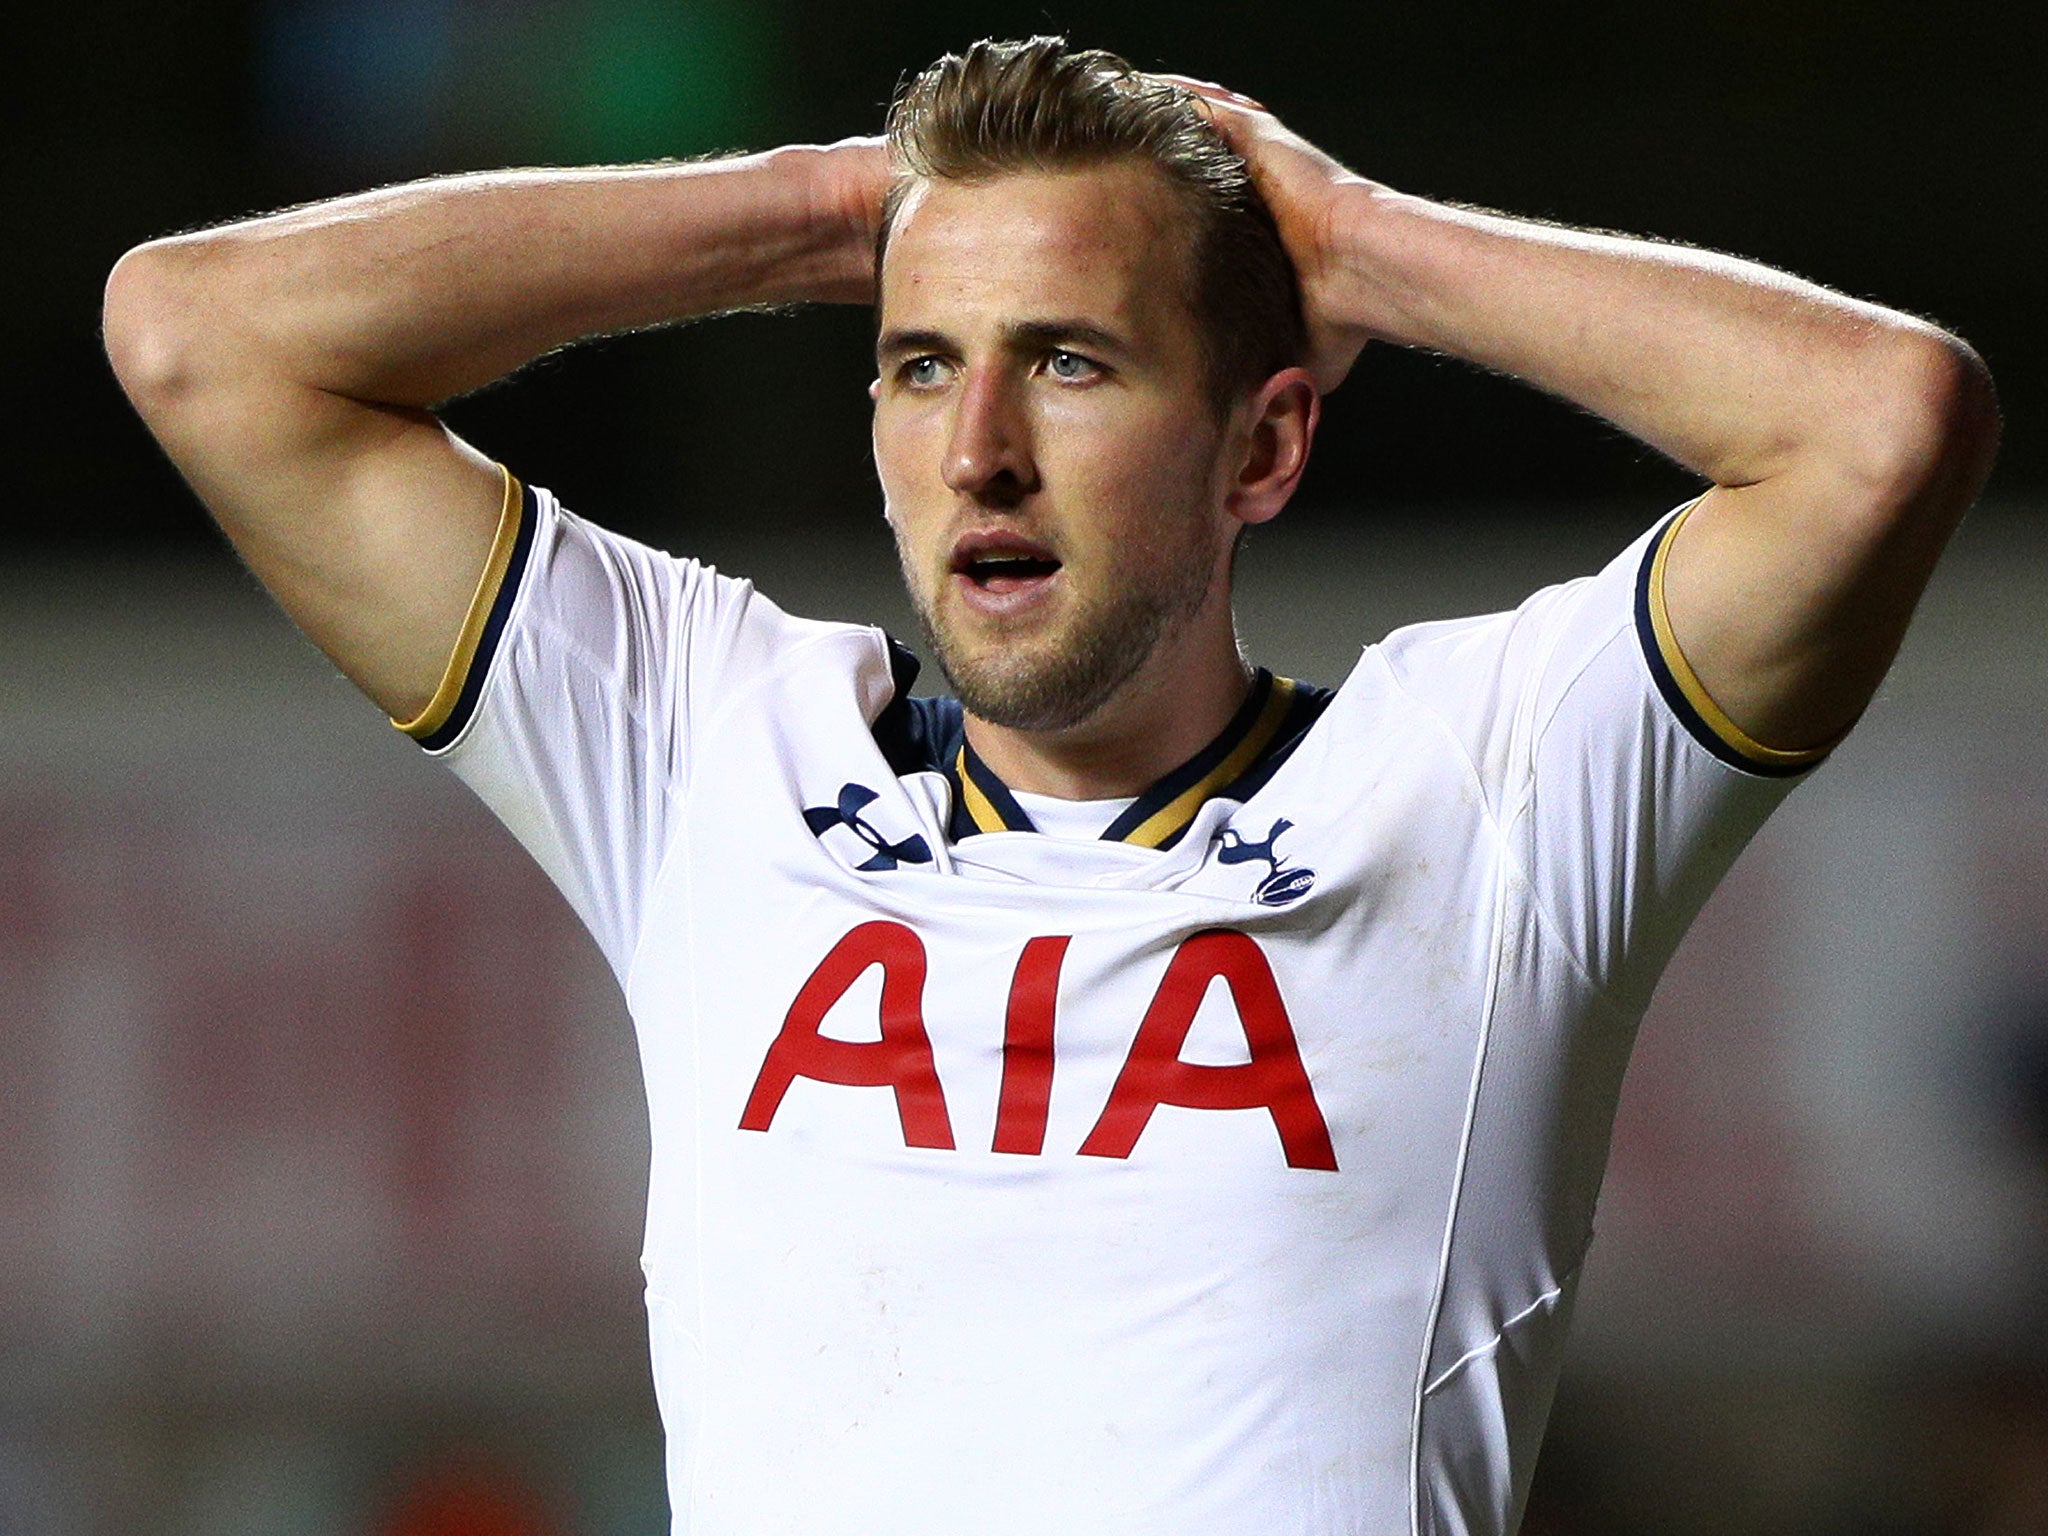 Tottenham's failure to win the title last season doesn't sit well with Kane